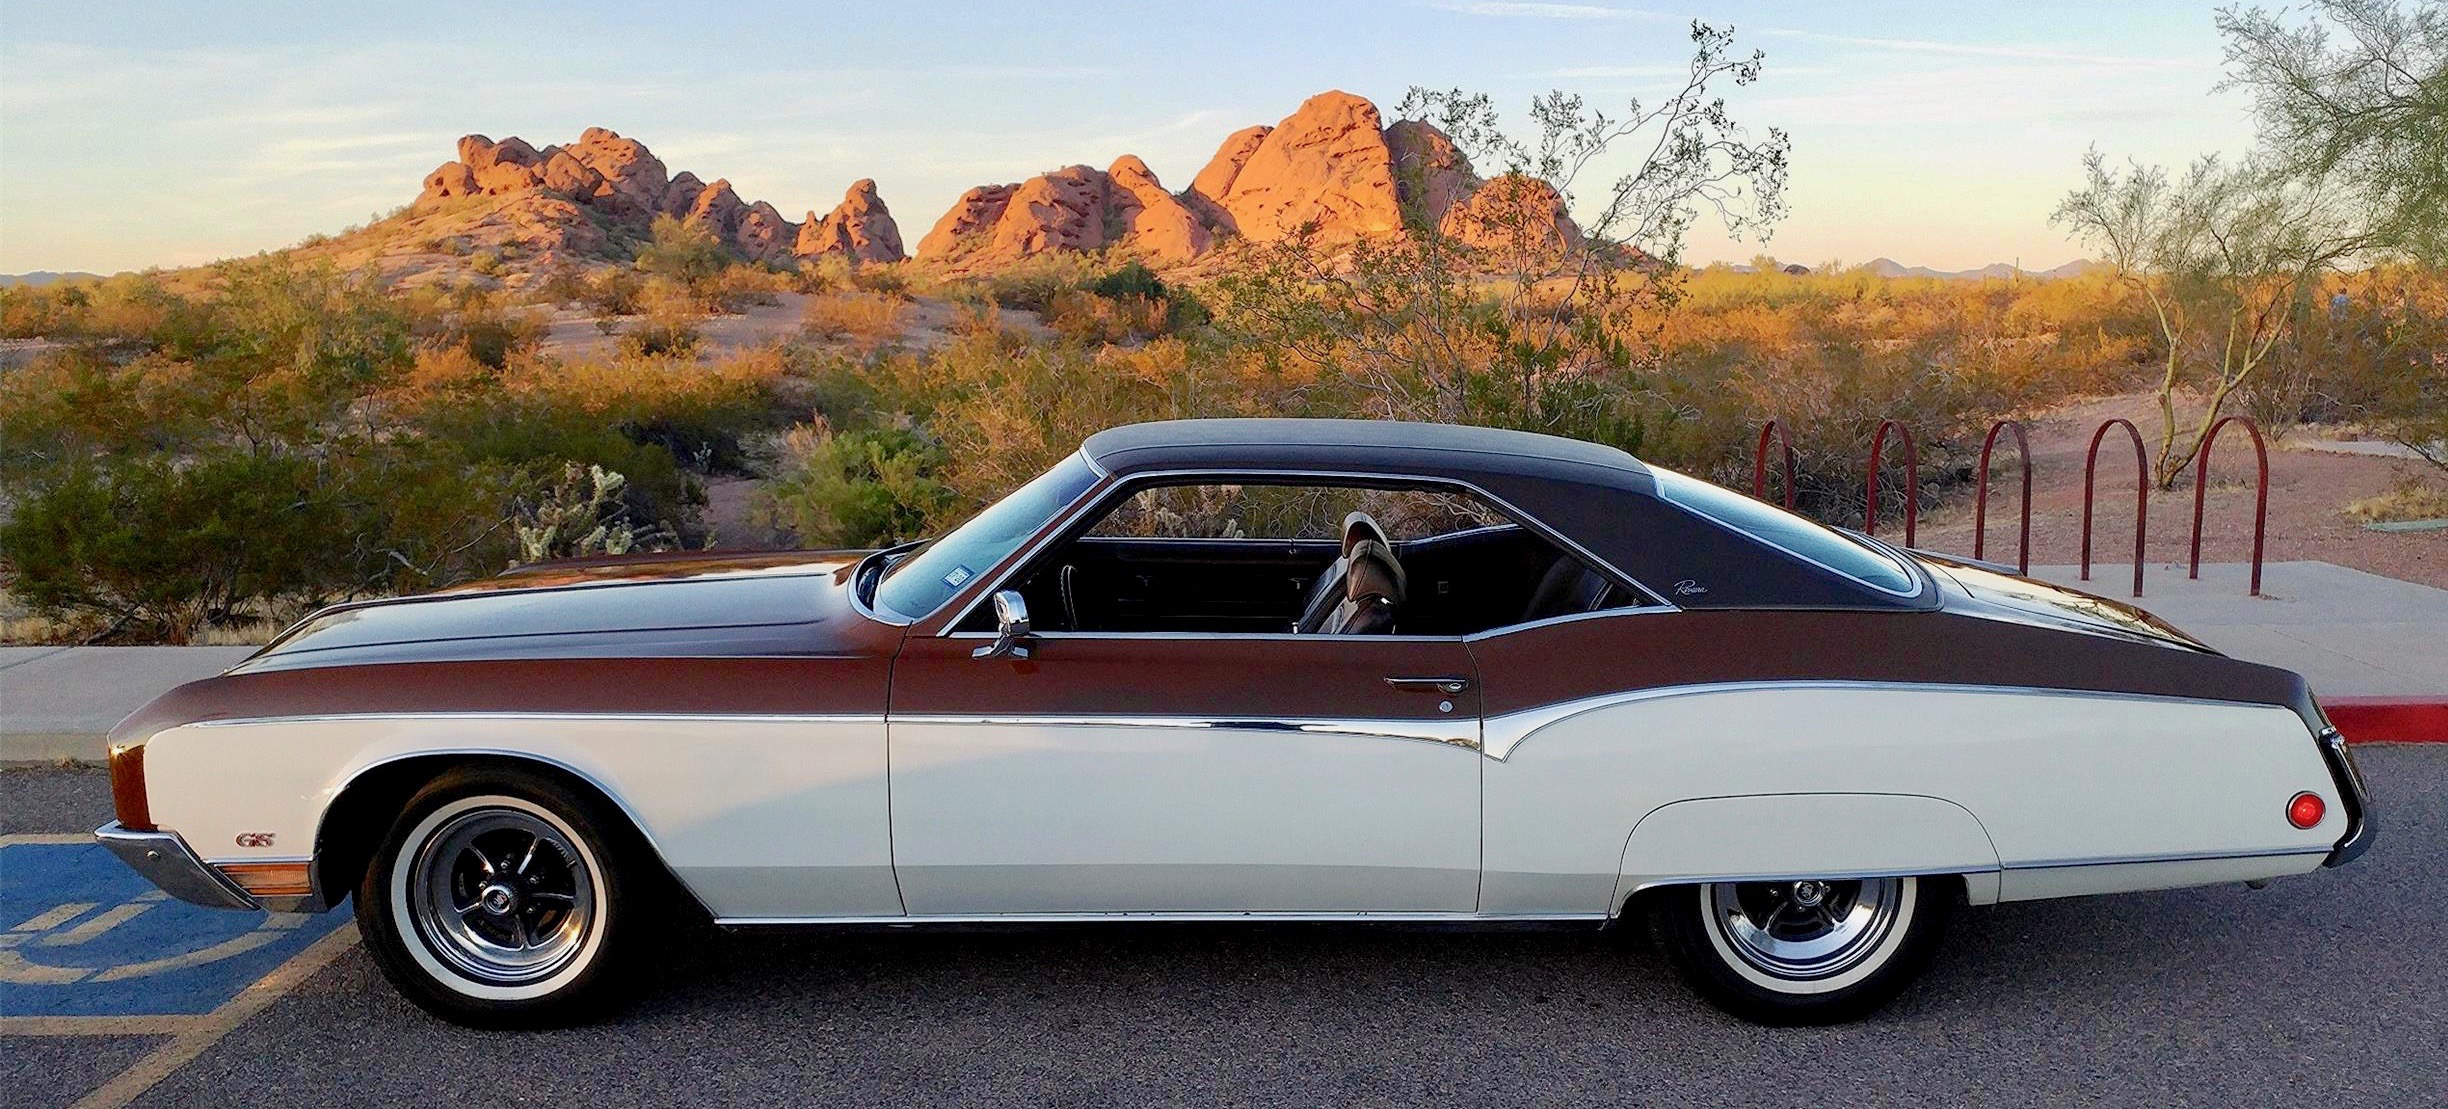 1970 Buick Riviera, Two-tone paint gives this Riv a special look, ClassicCars.com Journal